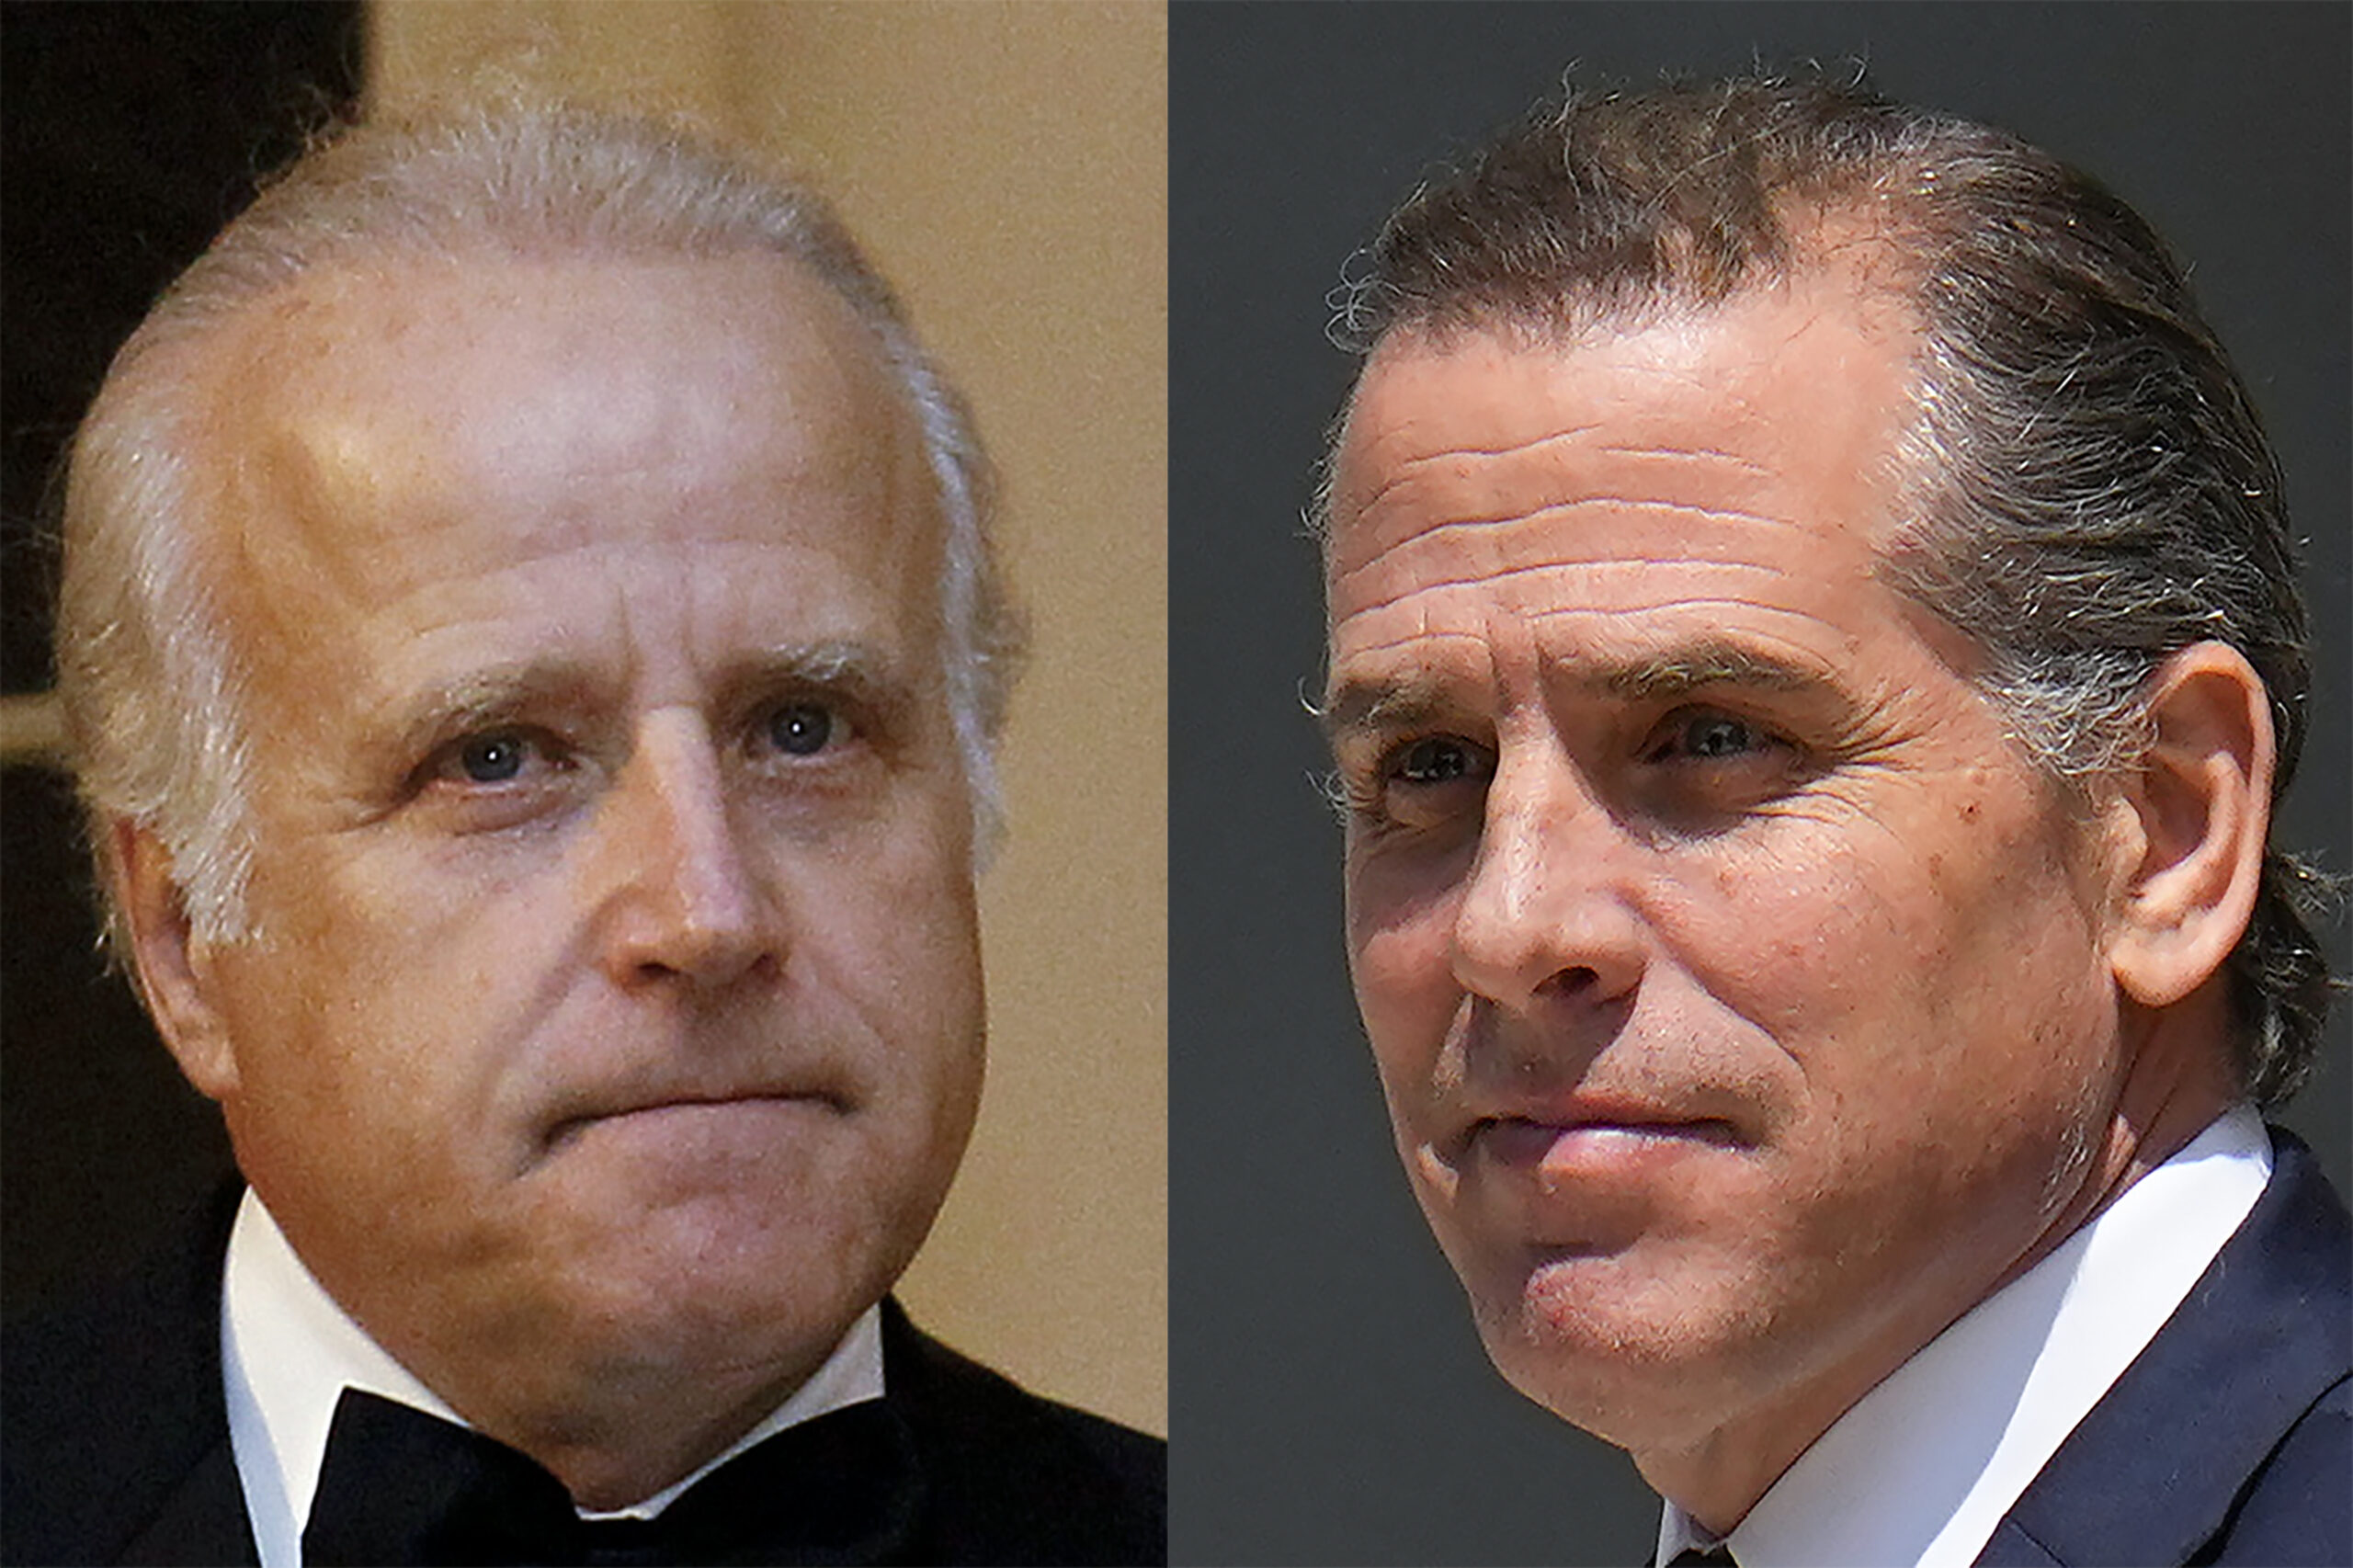 FILE - This combo image shows James Biden, President Joe Biden's brother, Oct. 13, 2011, left, and ...